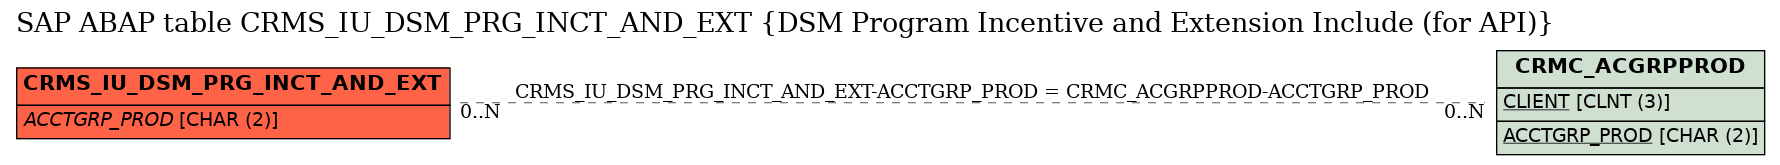 E-R Diagram for table CRMS_IU_DSM_PRG_INCT_AND_EXT (DSM Program Incentive and Extension Include (for API))